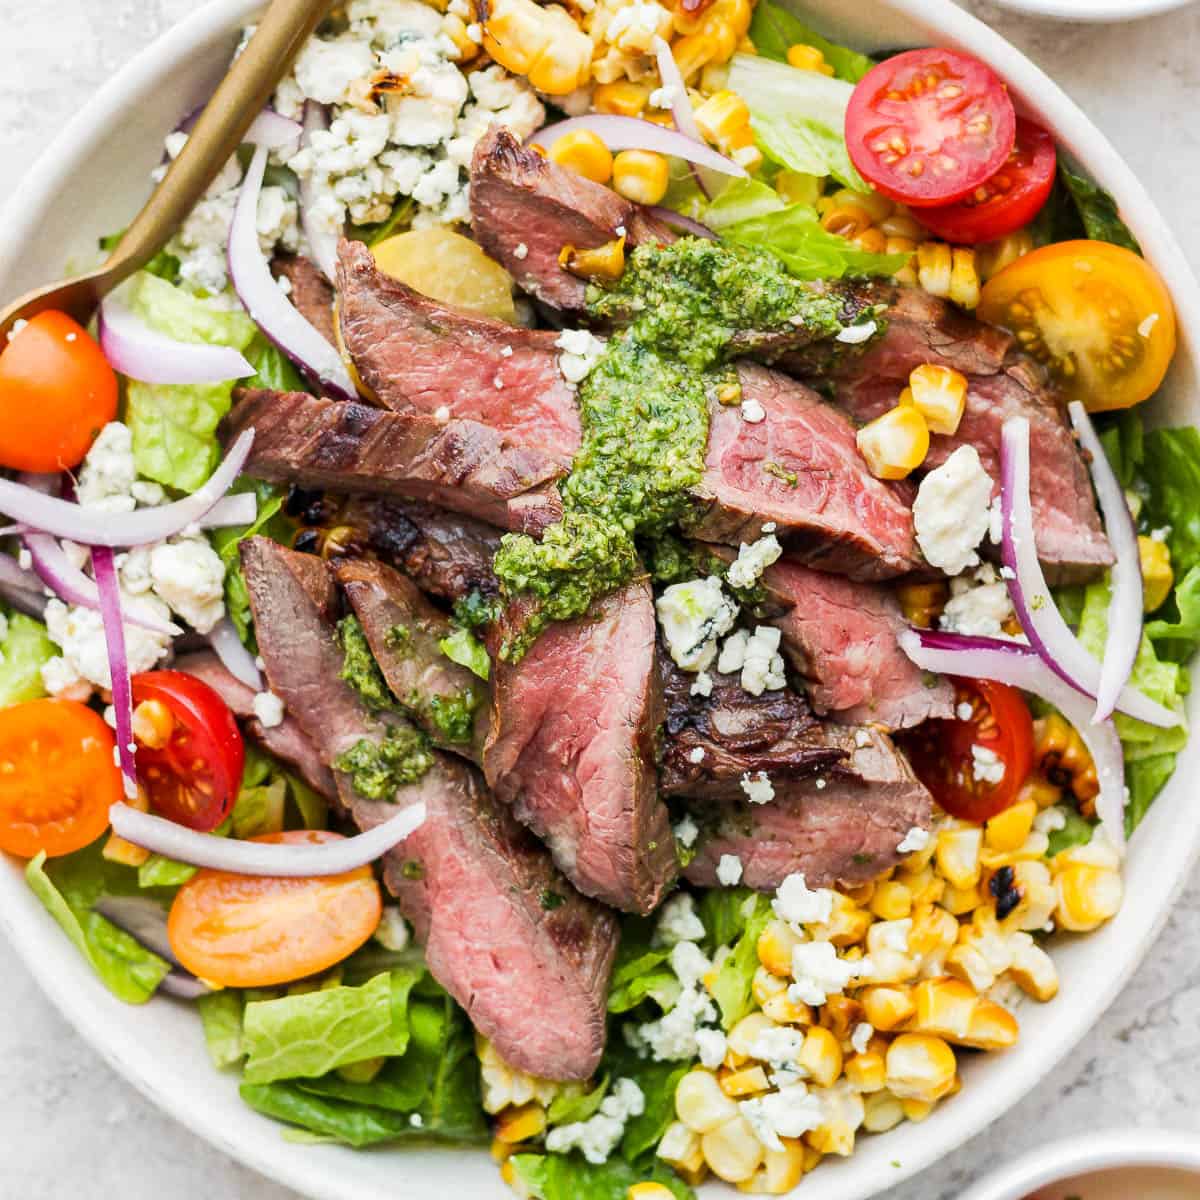 Recipe for a grilled flank steak salad.